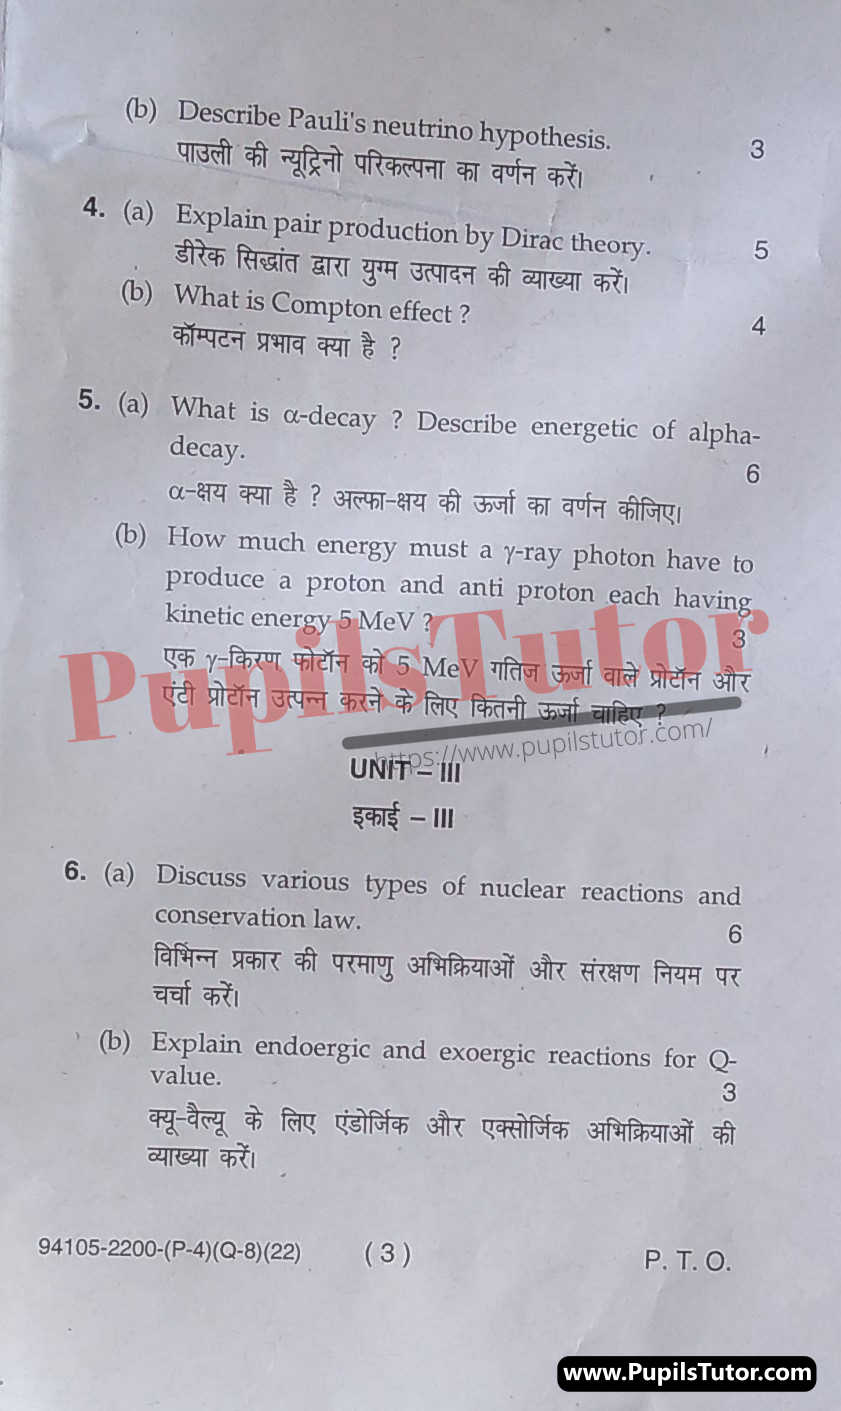 Free Download PDF Of M.D. University B.Sc. [Physics] Sixth Semester Latest Question Paper For Nuclear Physics Subject (Page 3) - https://www.pupilstutor.com